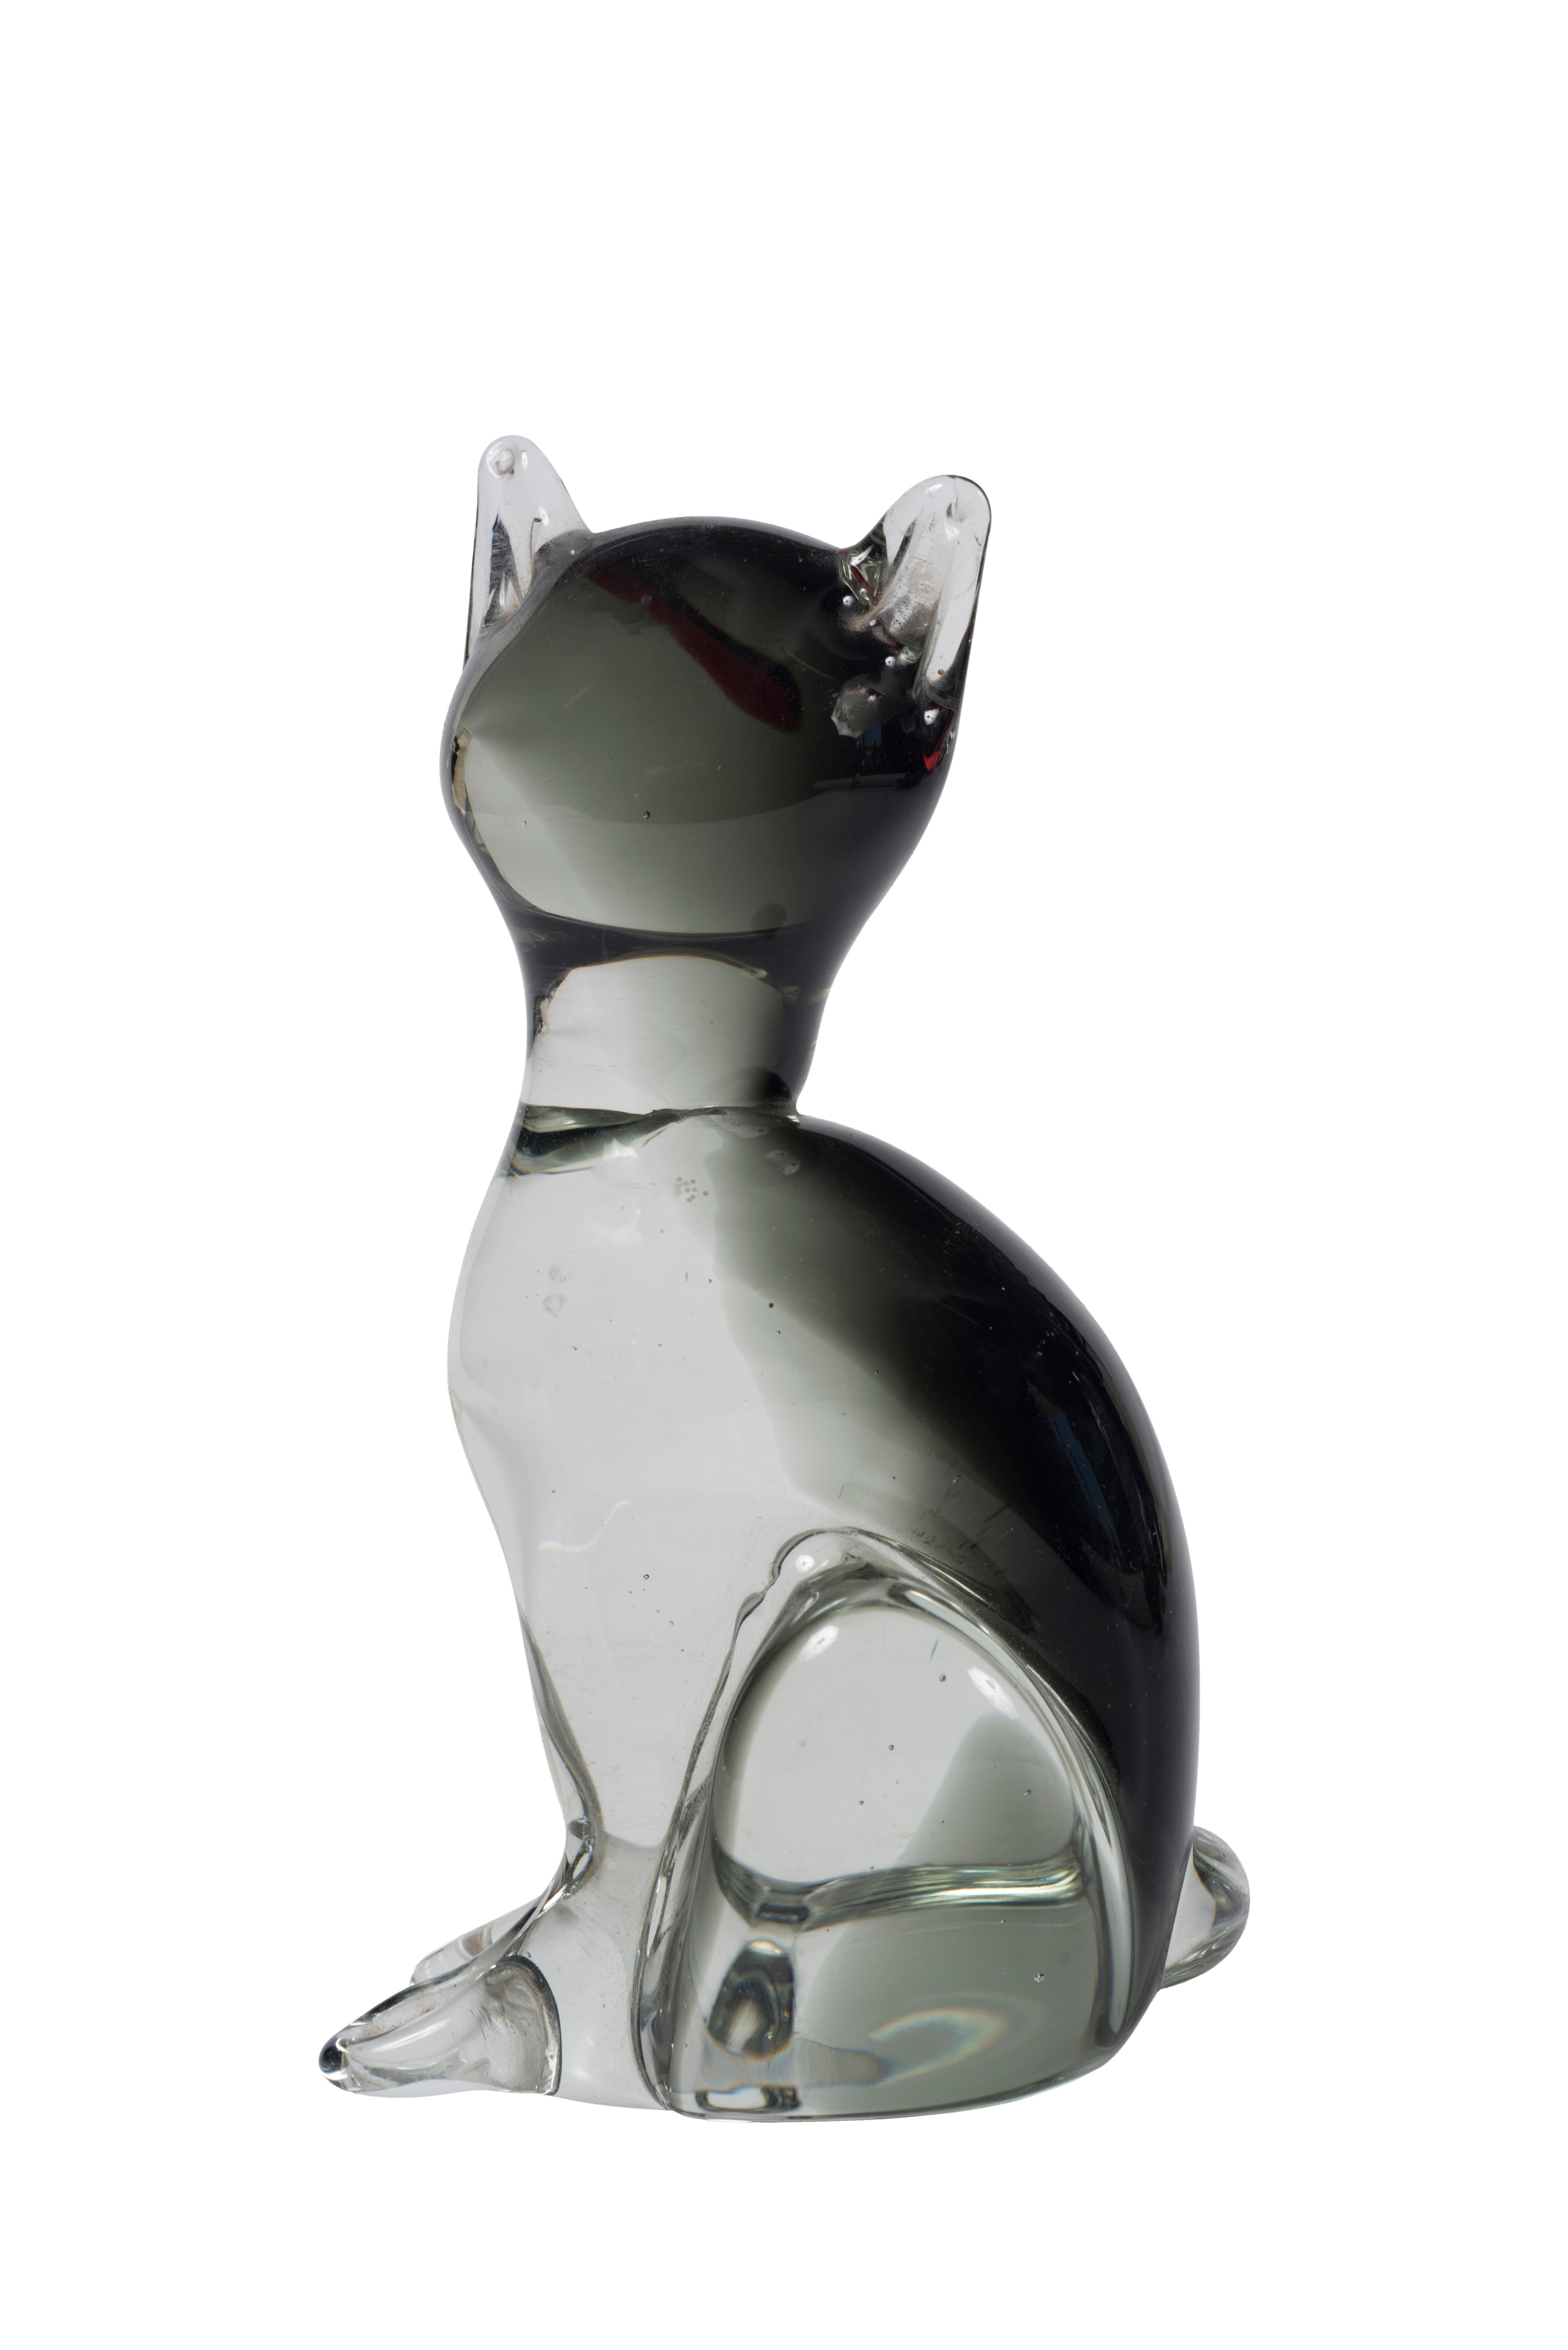 Beautiful handmade Murano glass cat with vitreous paste decorations.

Manufactured by Carlo Moretti in 1980s.

Very good conditions.